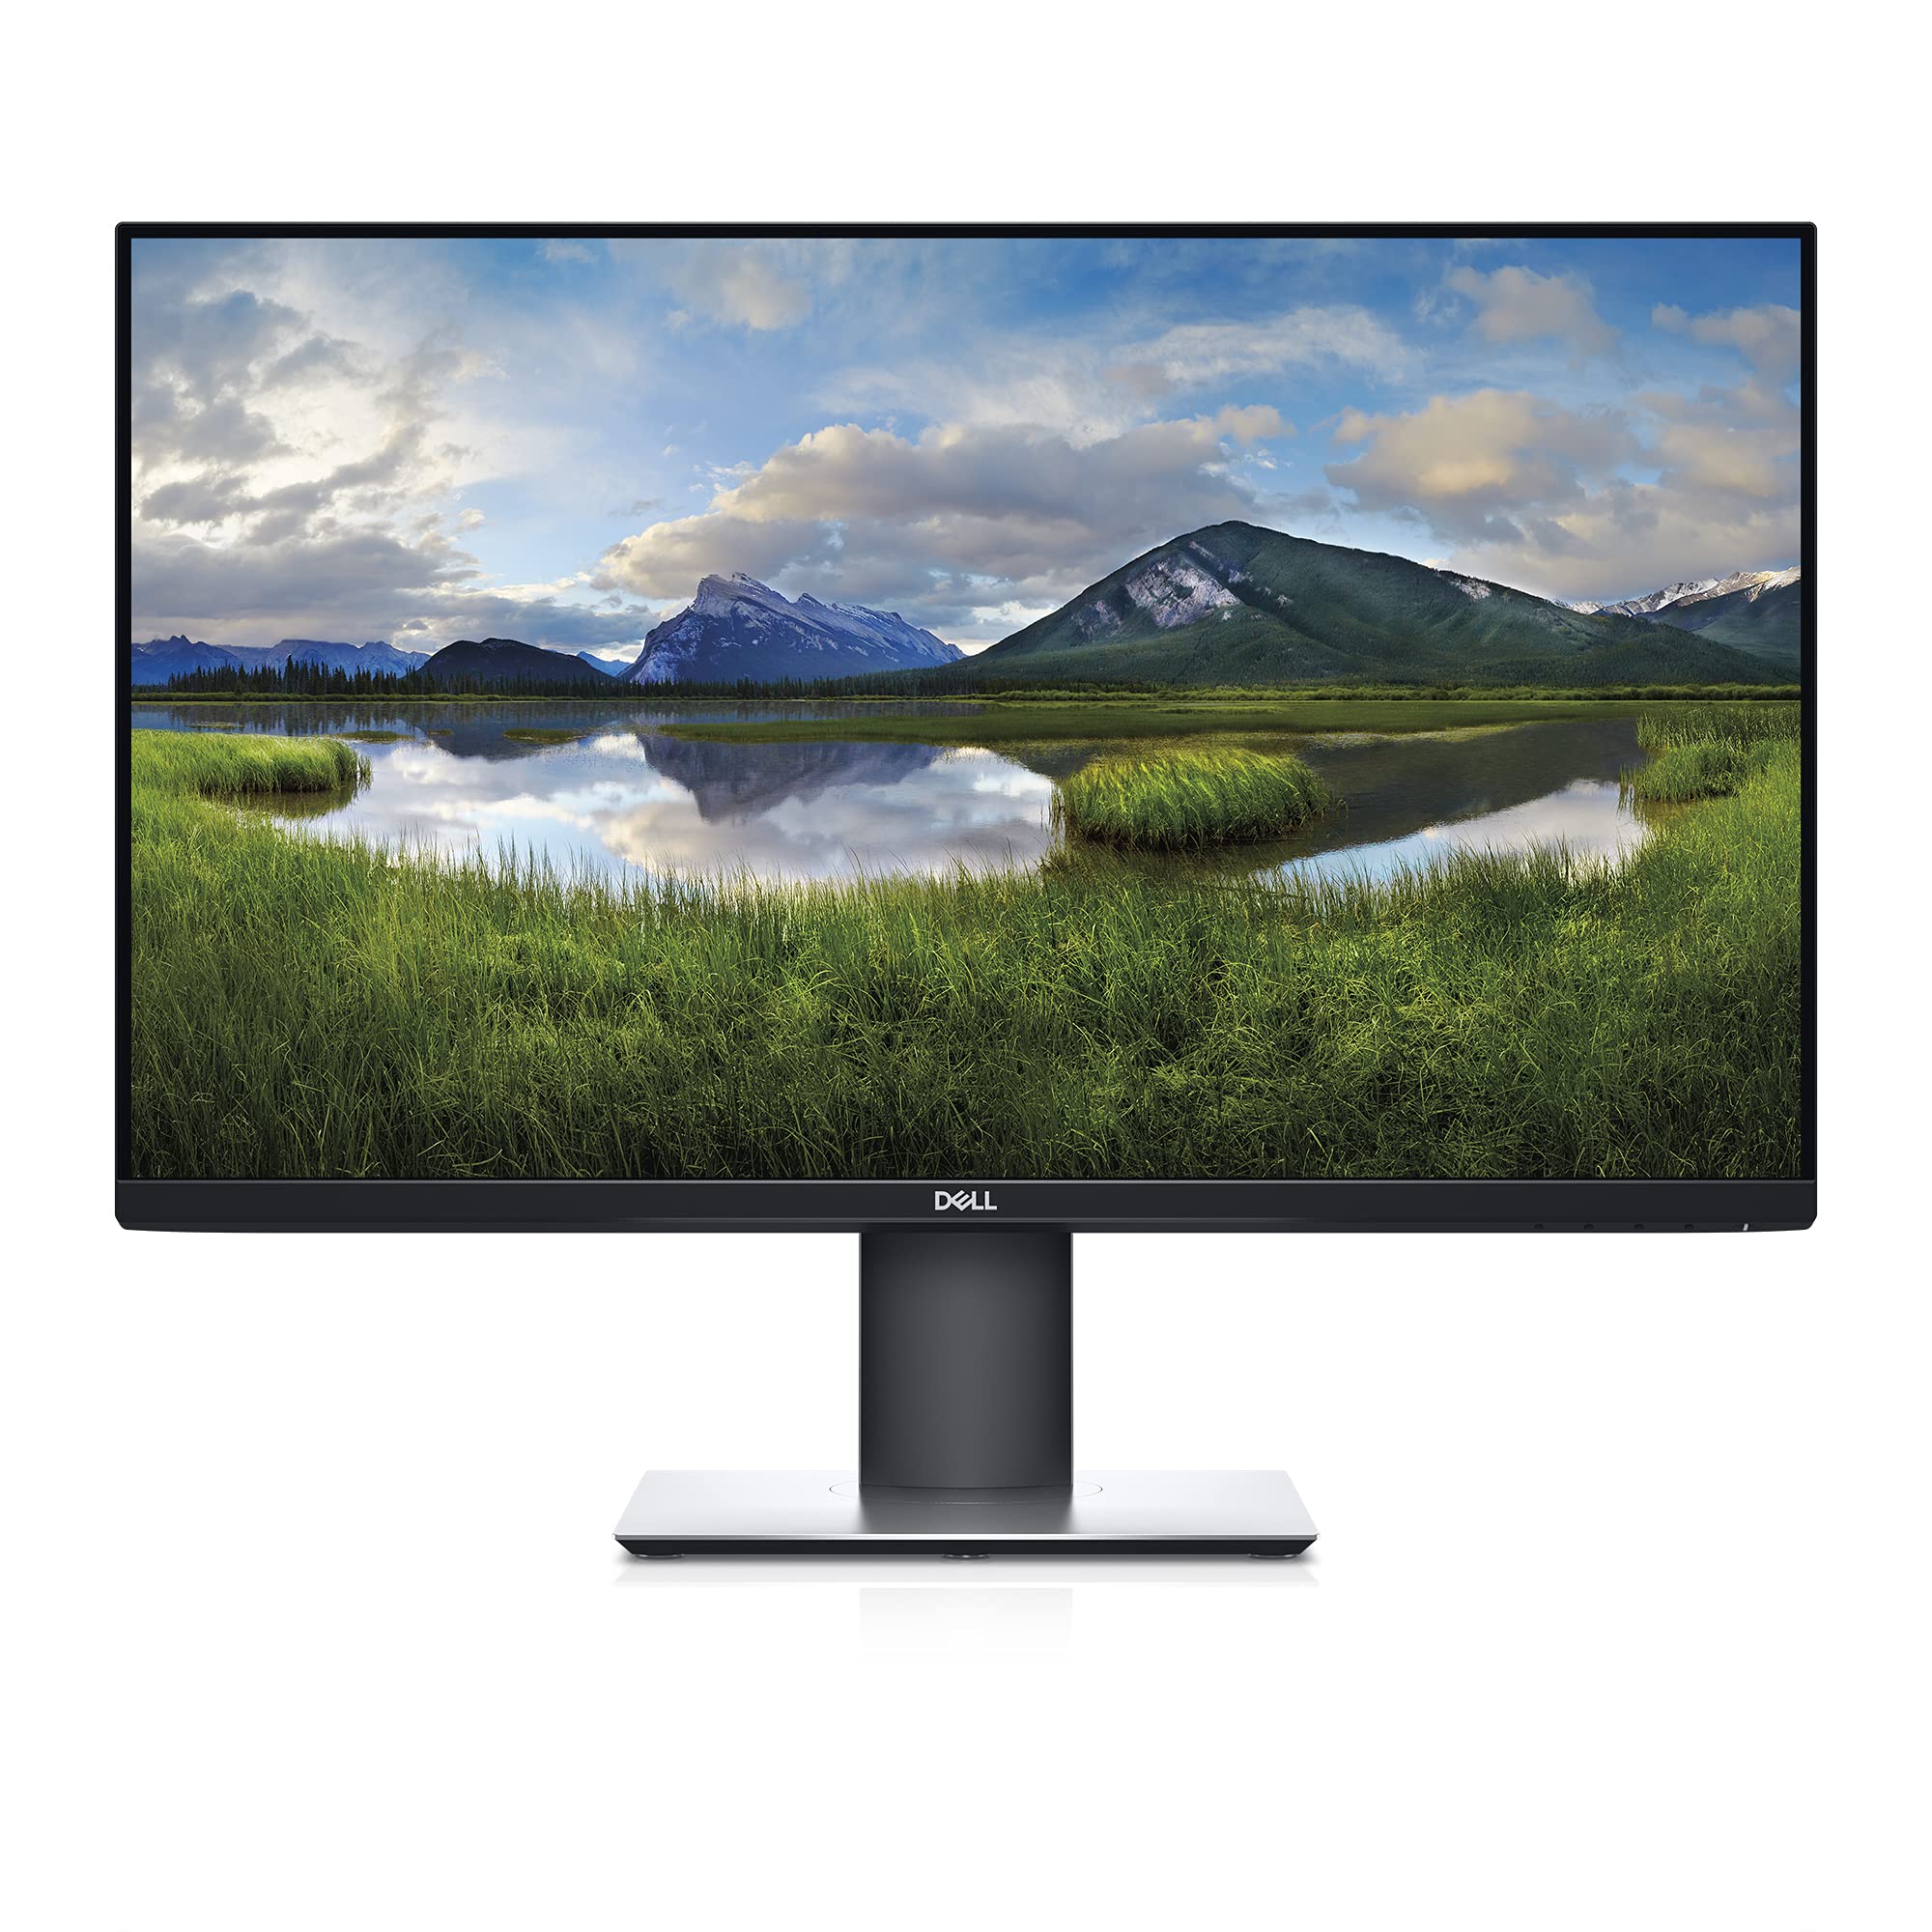 Dell P Series 27-Inch Screen Led-Lit Monitor (P2719H), ...